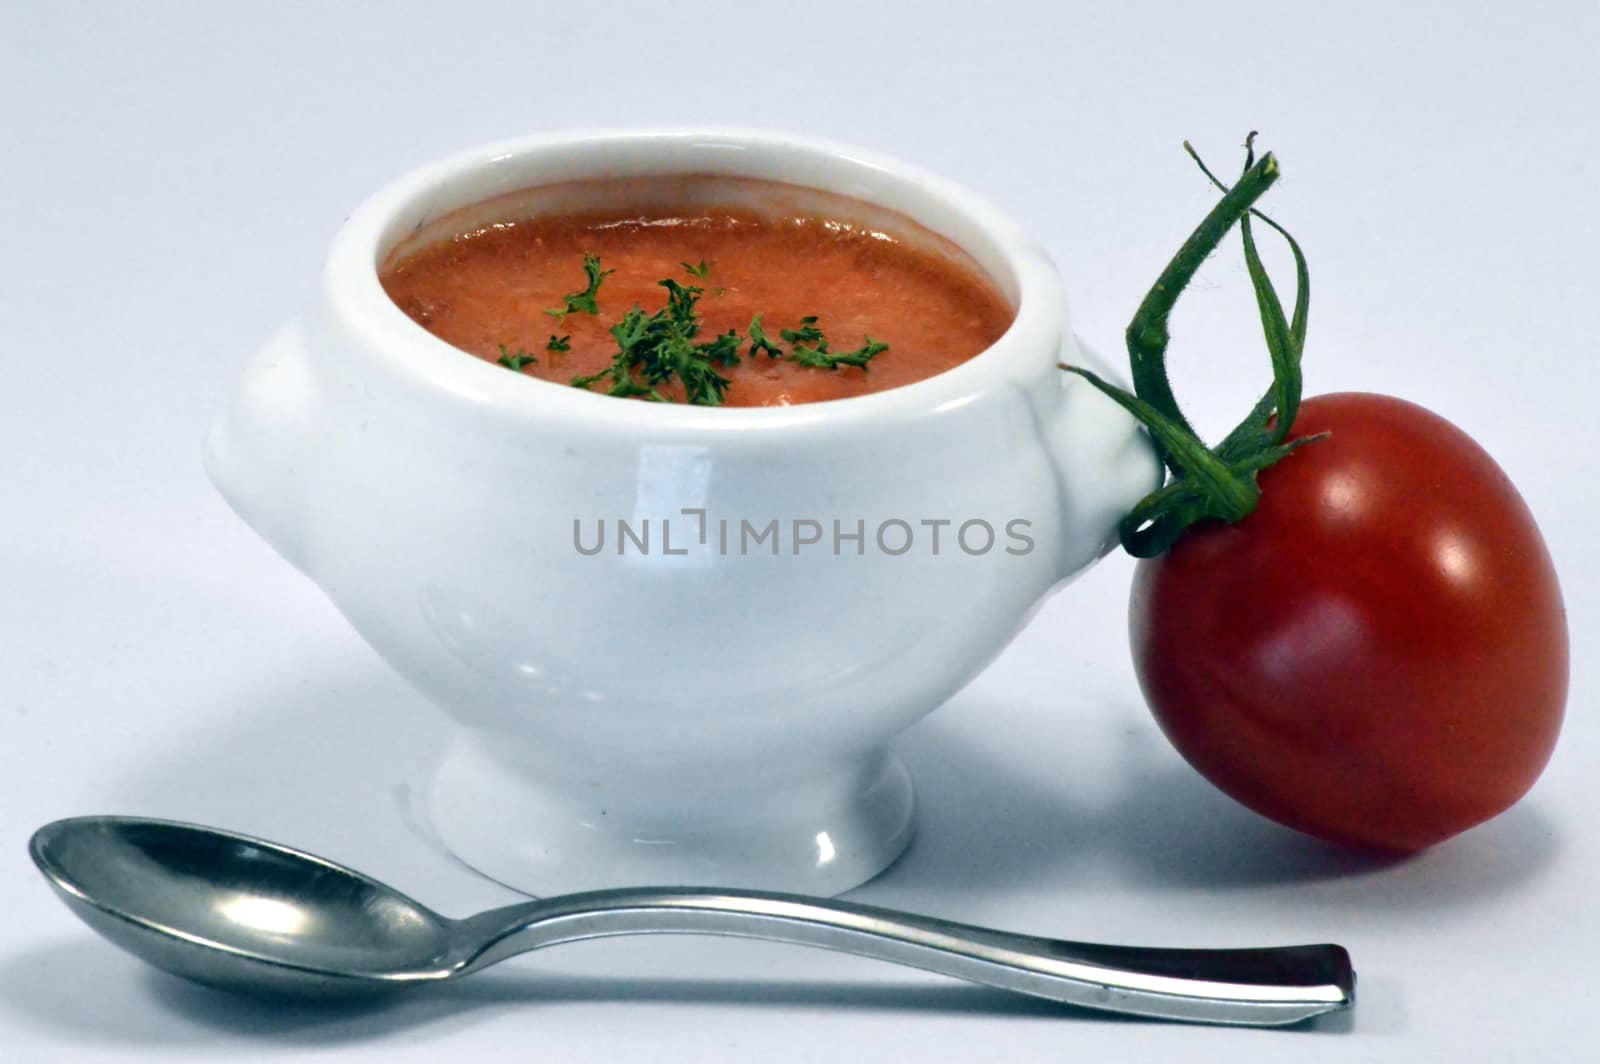 Cream of tomato soup in a white bowl with a spoon and a cherry tomato.